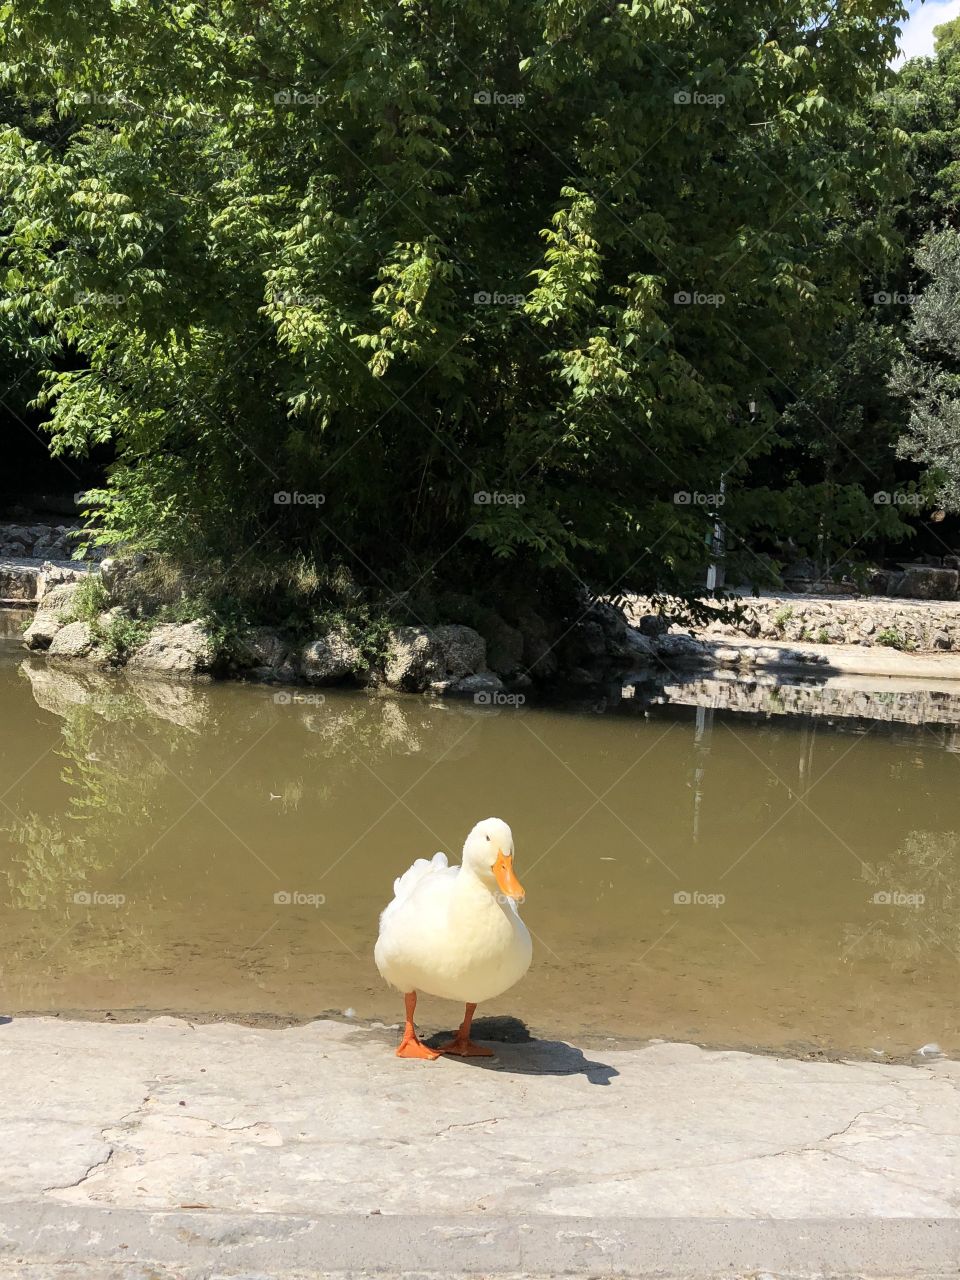 Don’t miss with this nice duck 